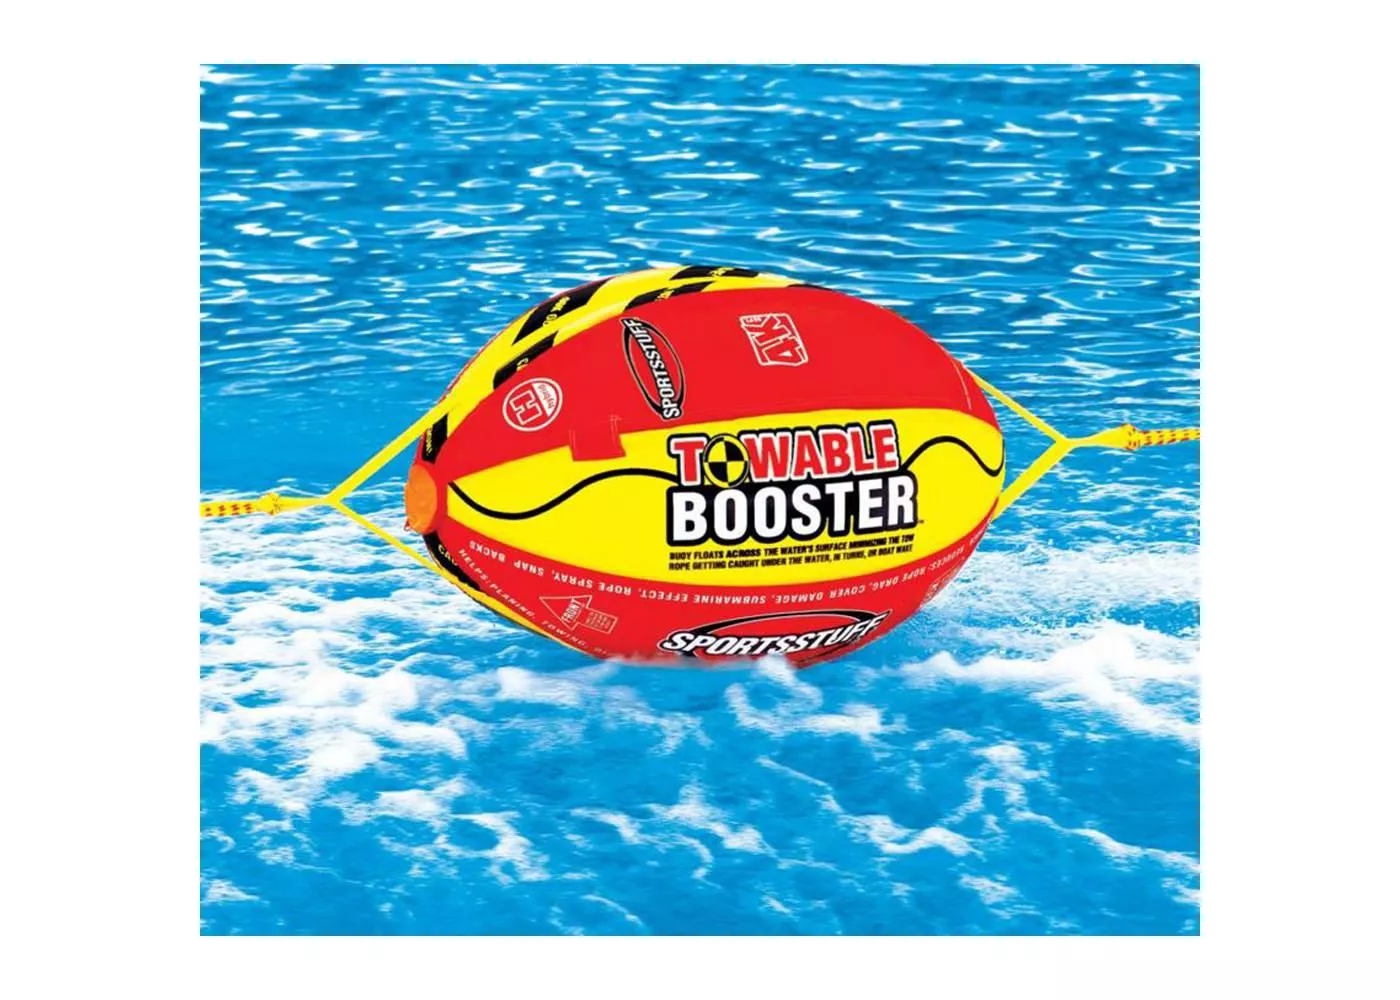 Airhead SPORTSSTUFF 53-2030 Boat Tubing Towable 4K Booster Ball Towing System with 2" Webbing, Speed Safety Valve, and Self Bailing Drain Vent - image 2 of 6